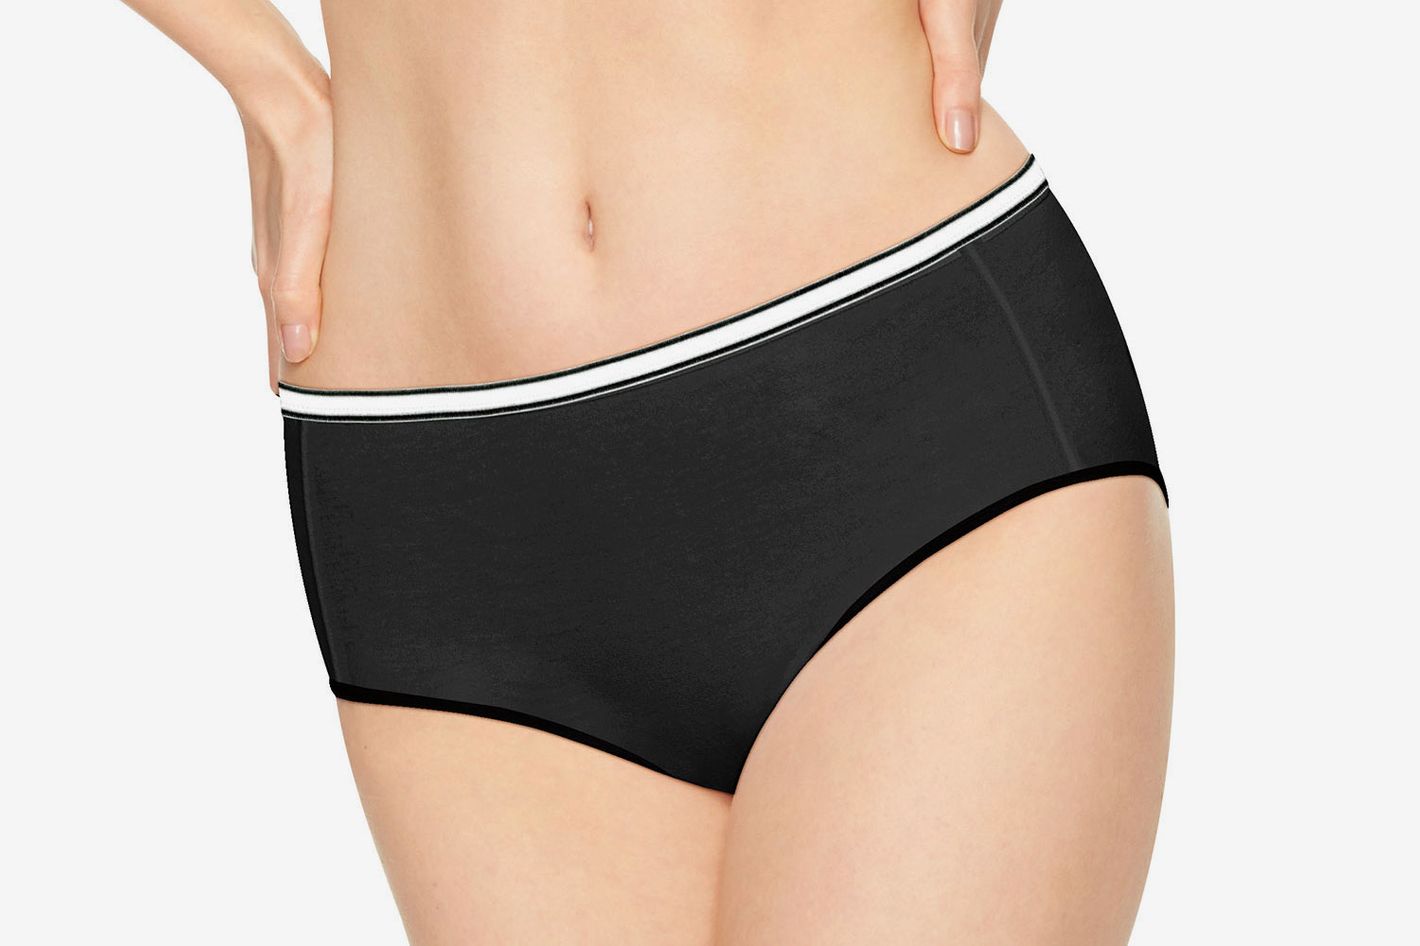 The Underwear Our Editors Buy 2018